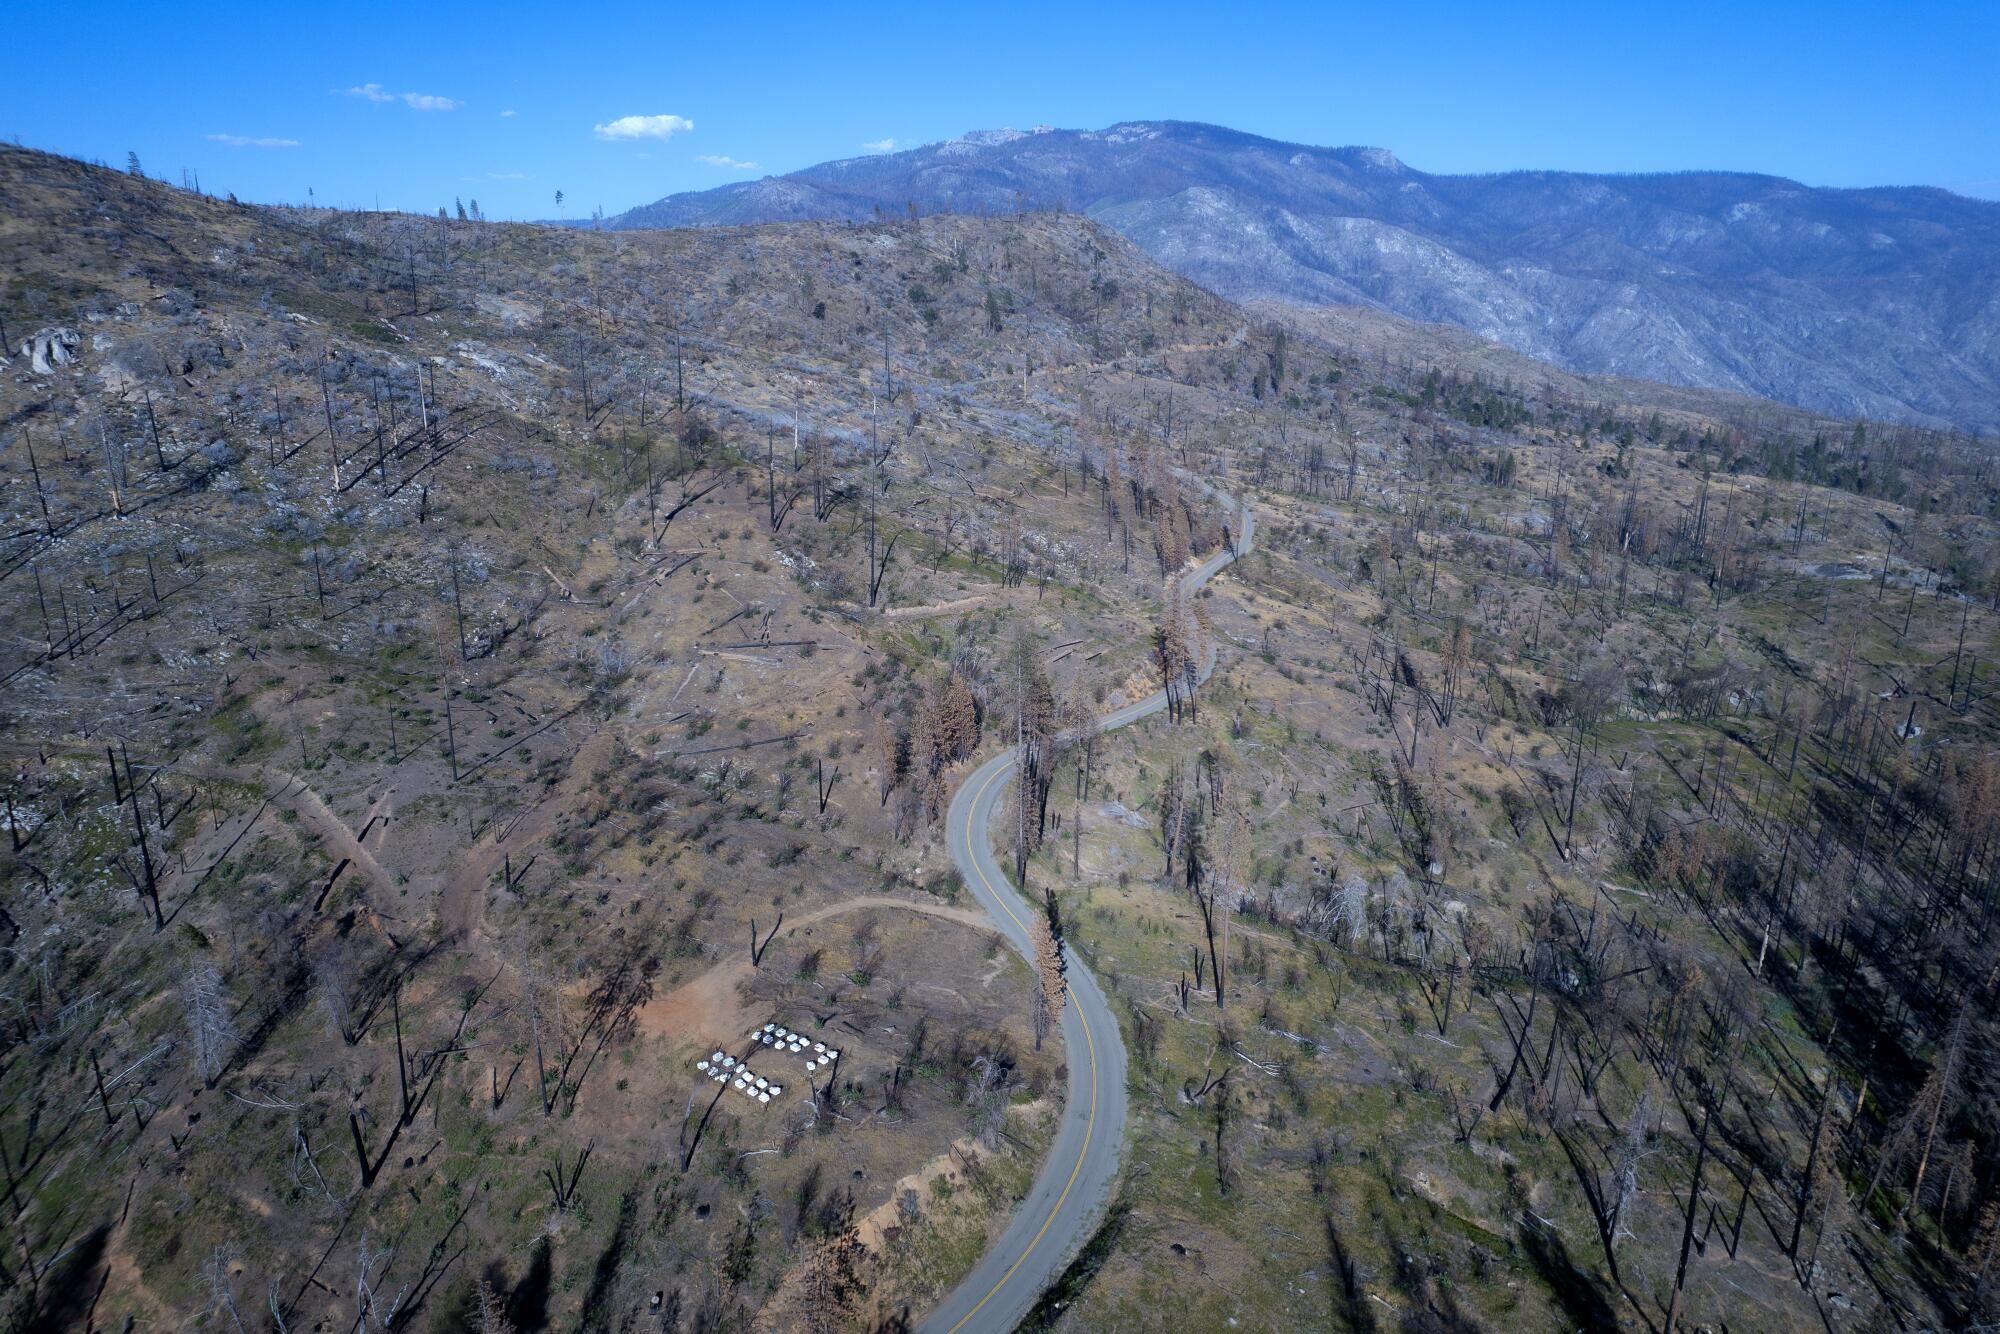 An aerial view of burned sections of the Sierra National Forest that were wiped out in the Creek Fire.